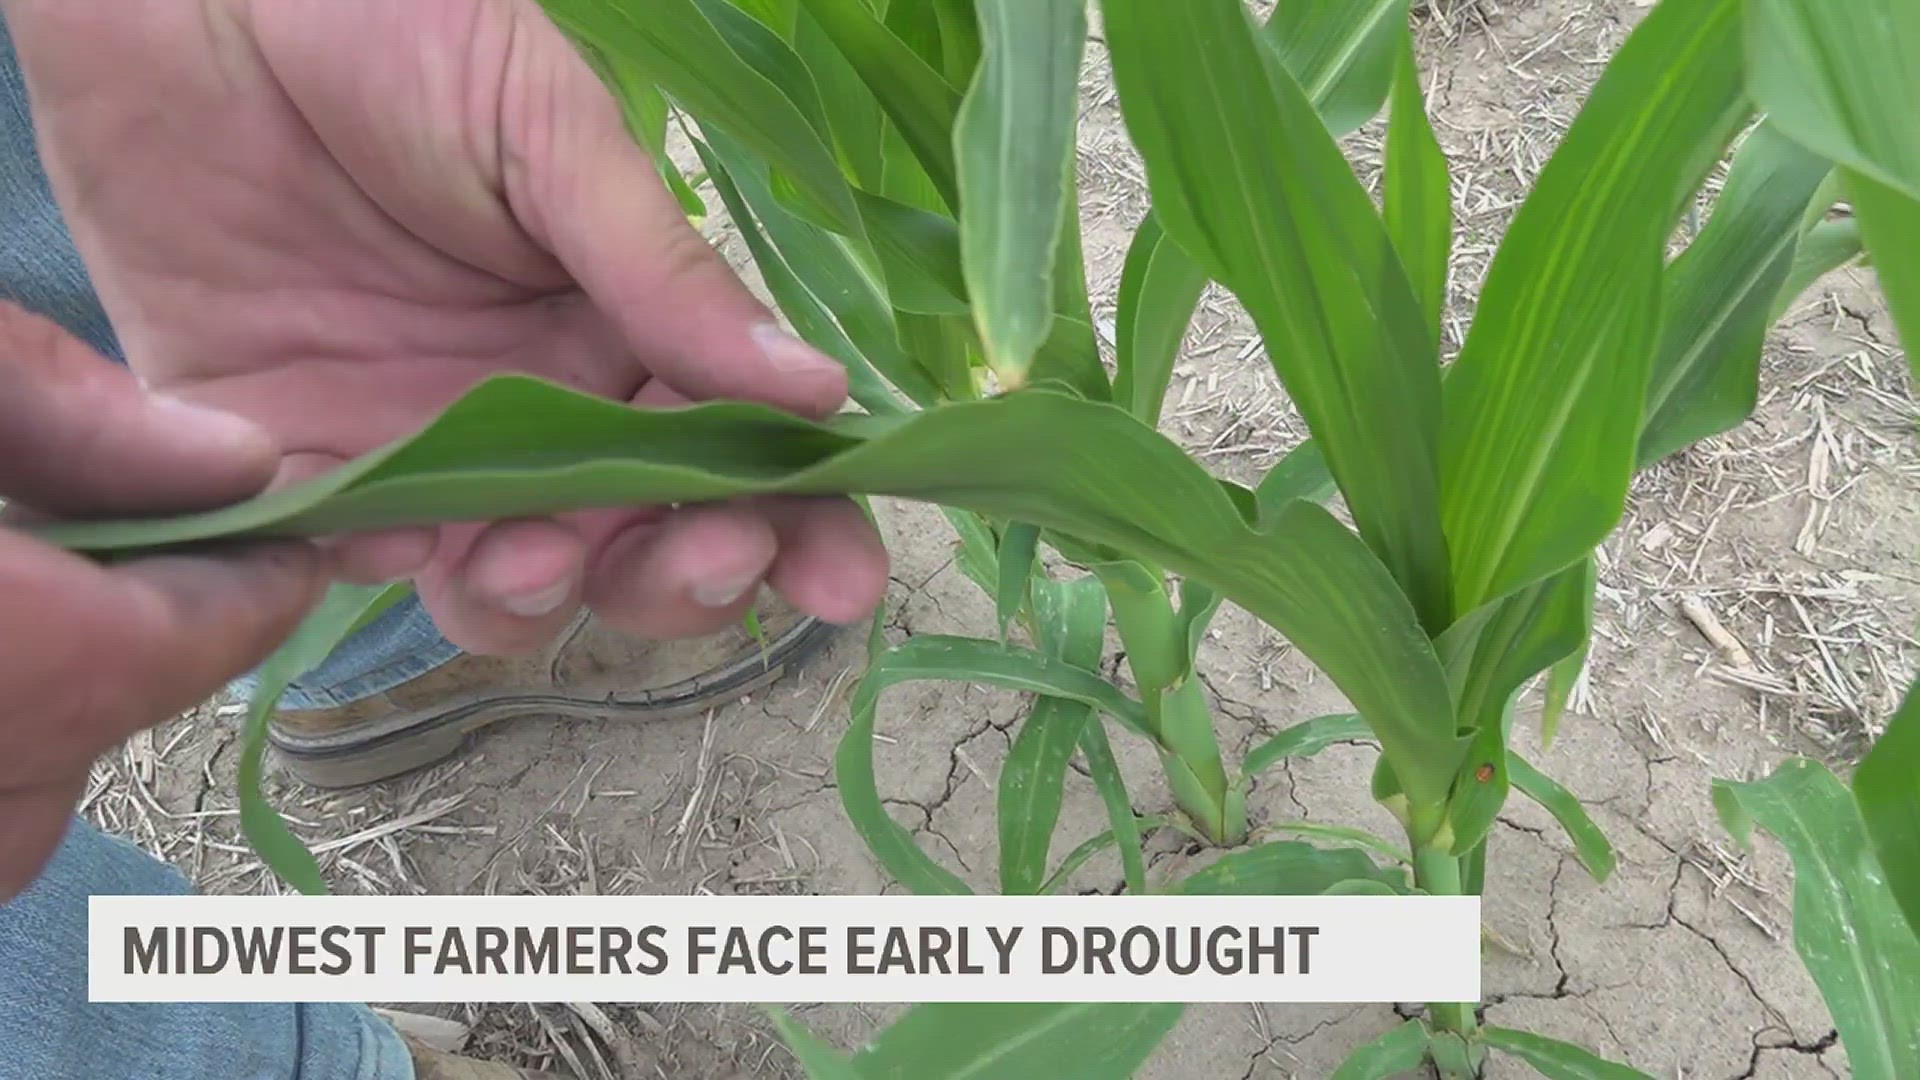 Farmers said at least one inch of rain each week is ideal, but rain amounts in the past month have been far below that amount.